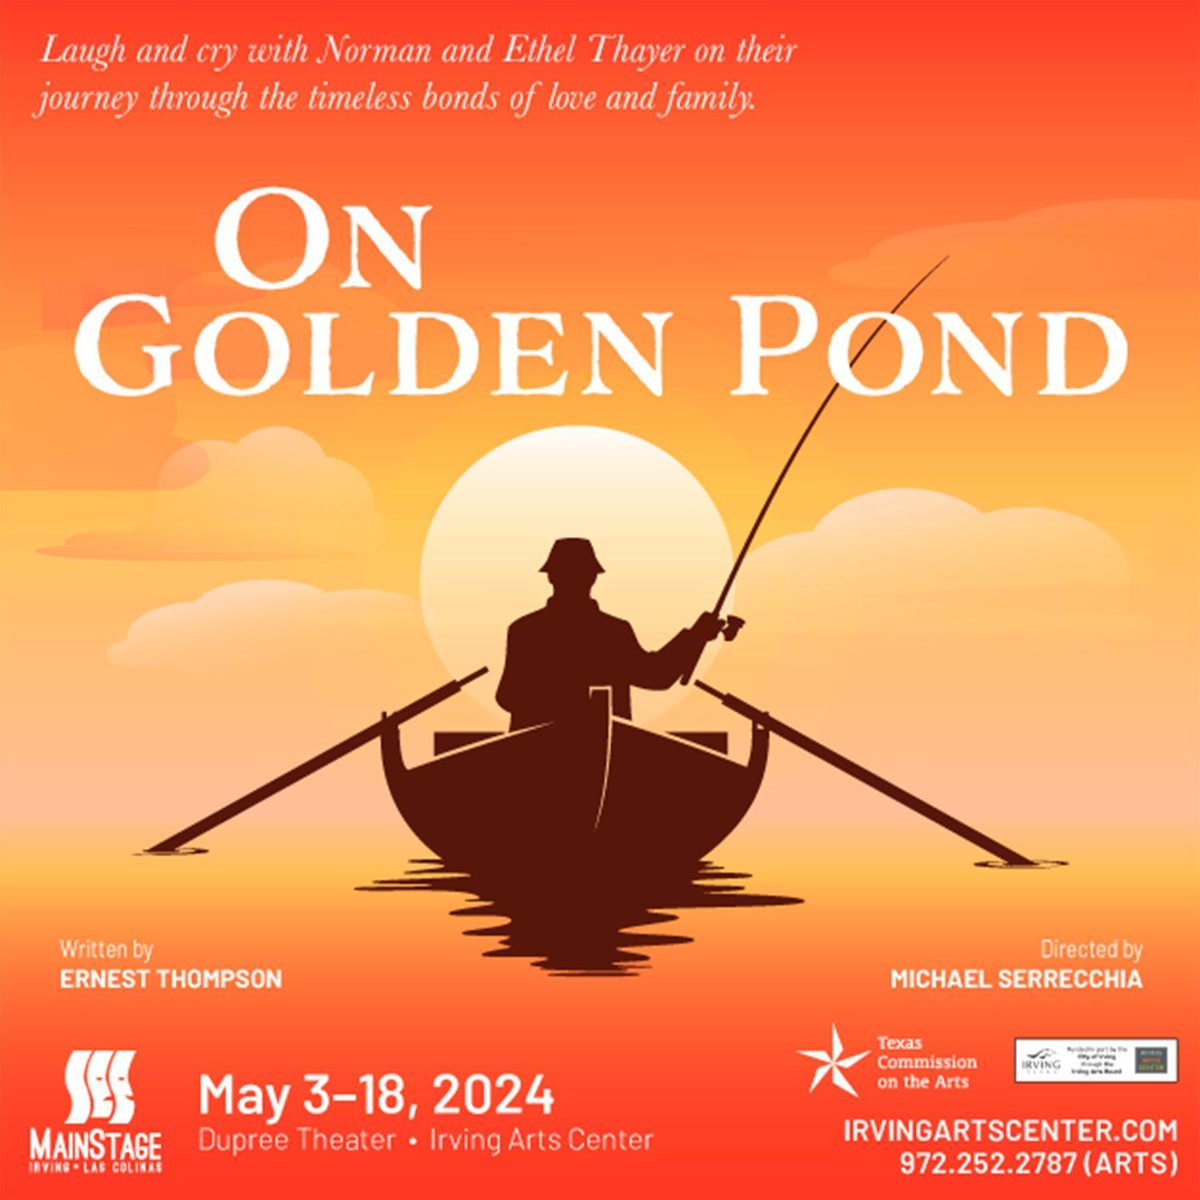 A timeless exploration of family, aging, and the power of love and forgiveness. See Mainstage's latest show opening tonight! Get Tickets -> buff.ly/3w6kssj #ongoldenpond #mainstage #irvingtheatre #irvingtheater